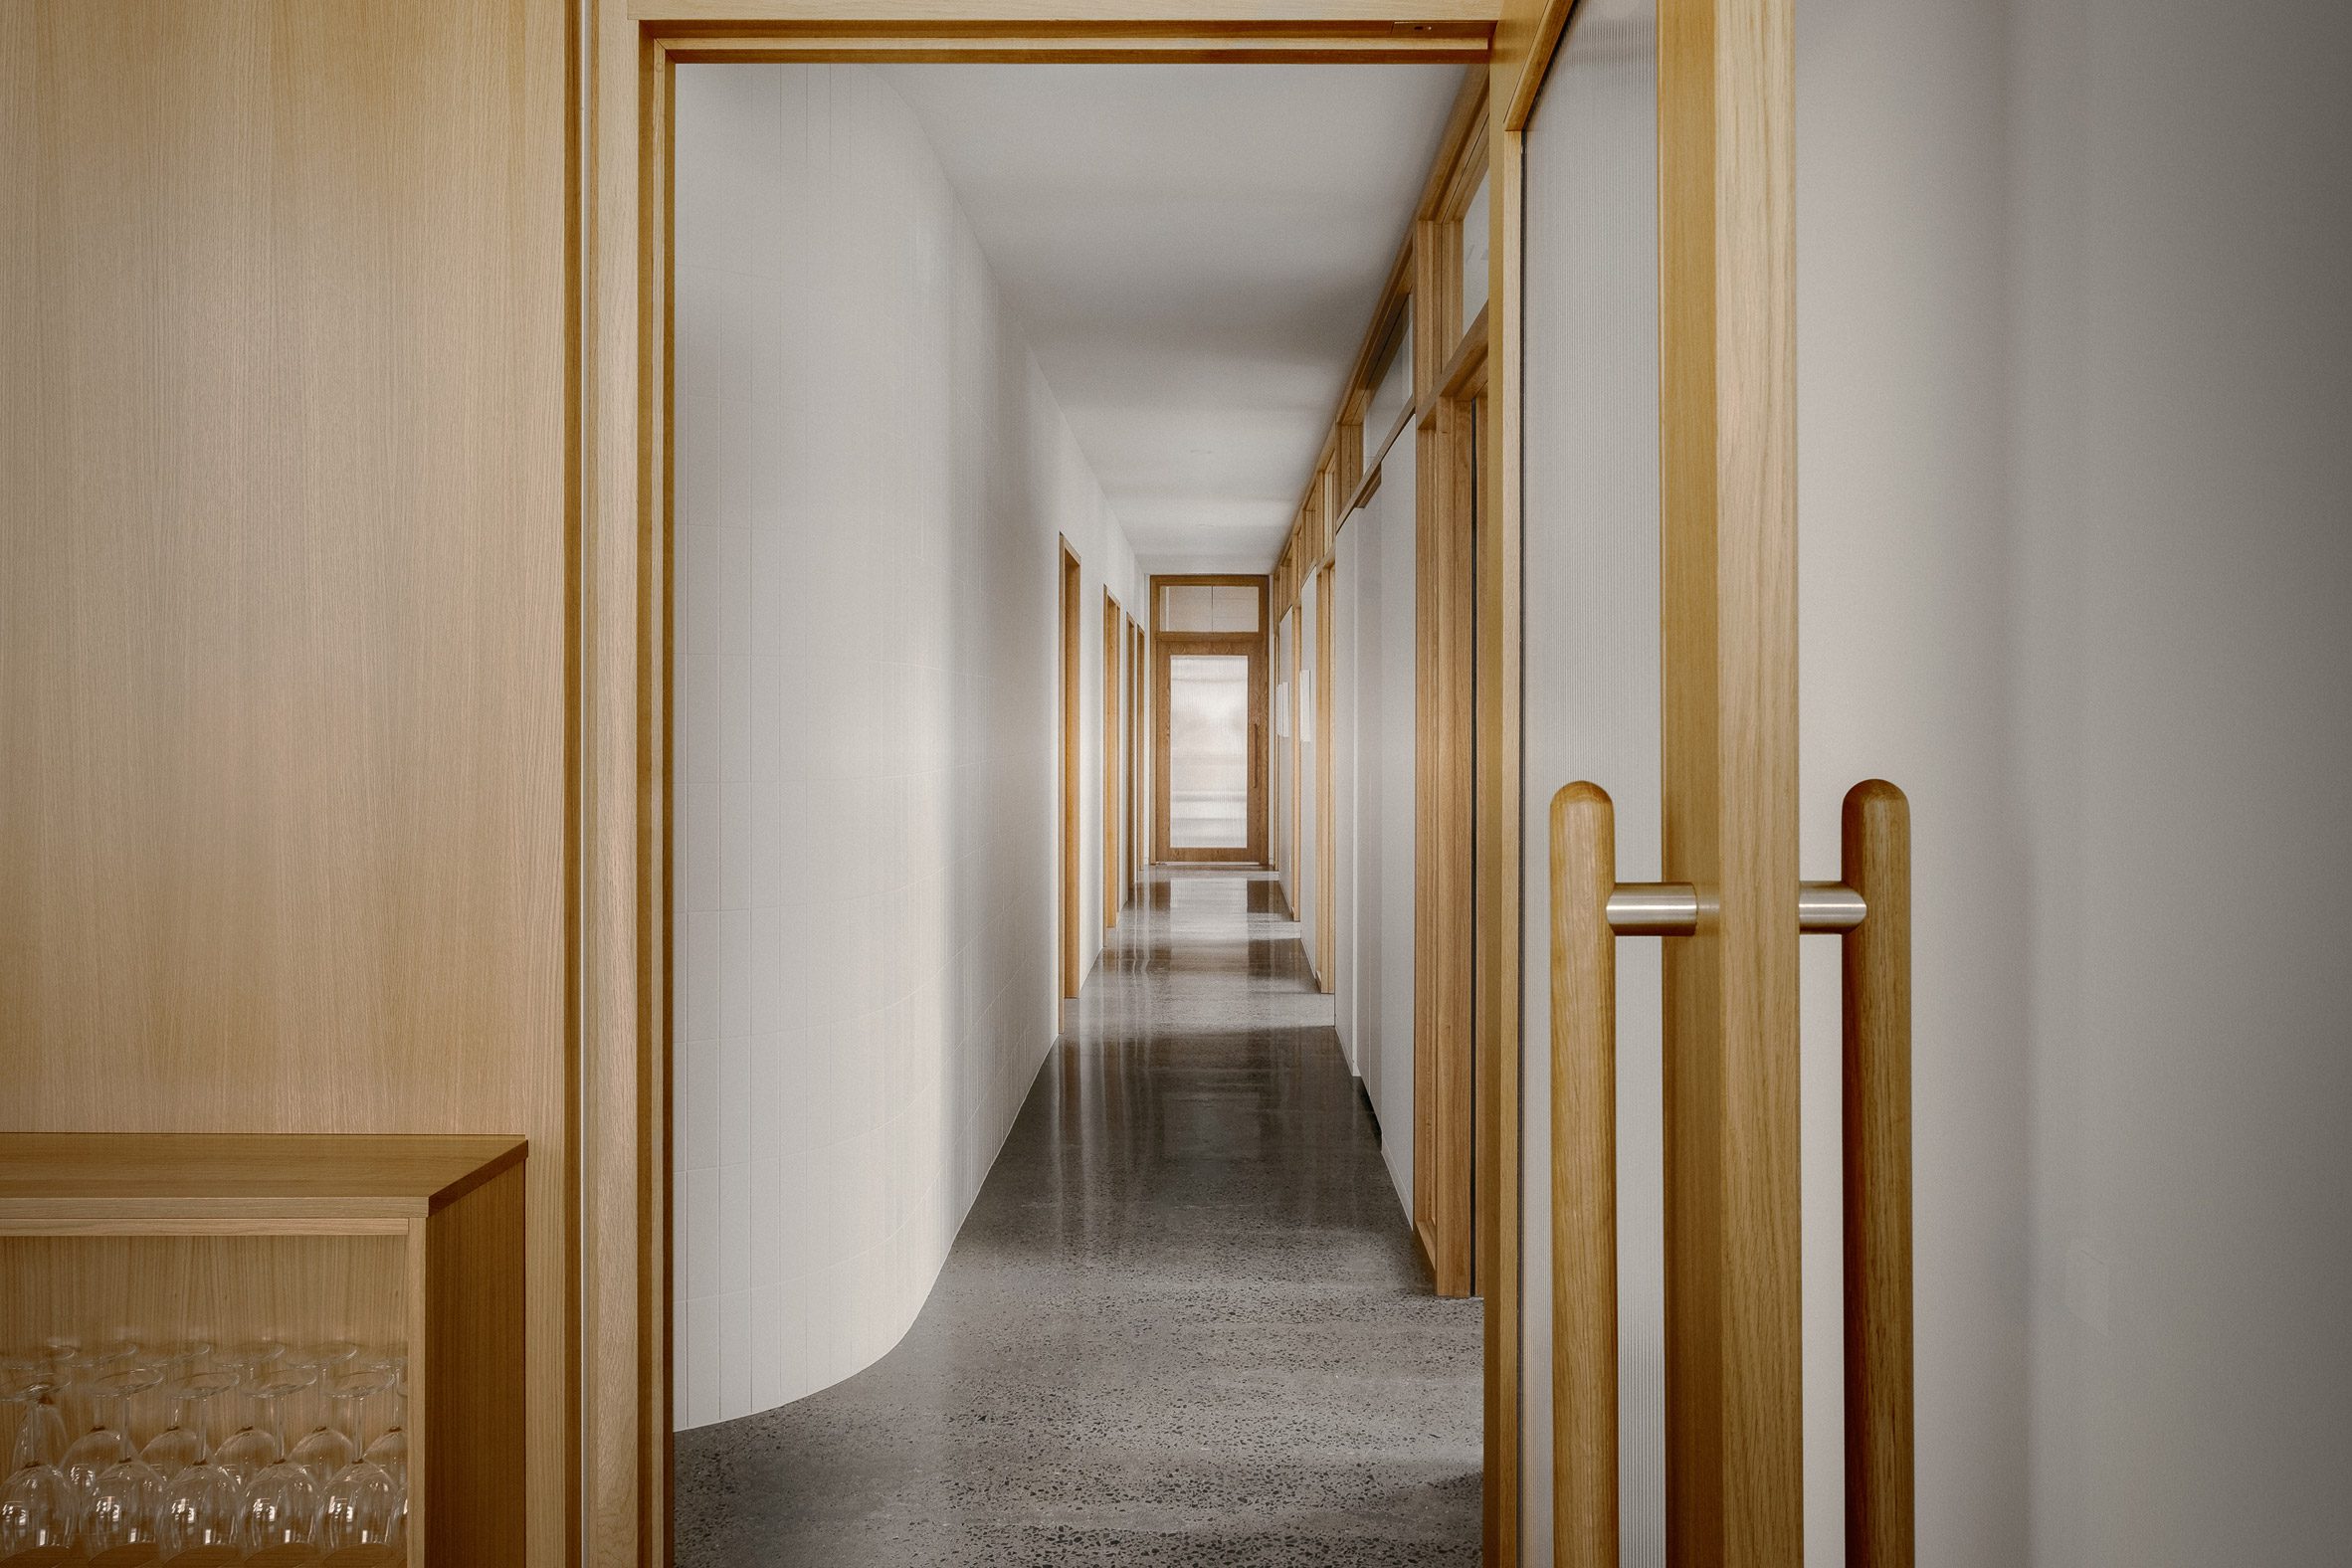 Corridor with white walls and wood-framed doors on either side